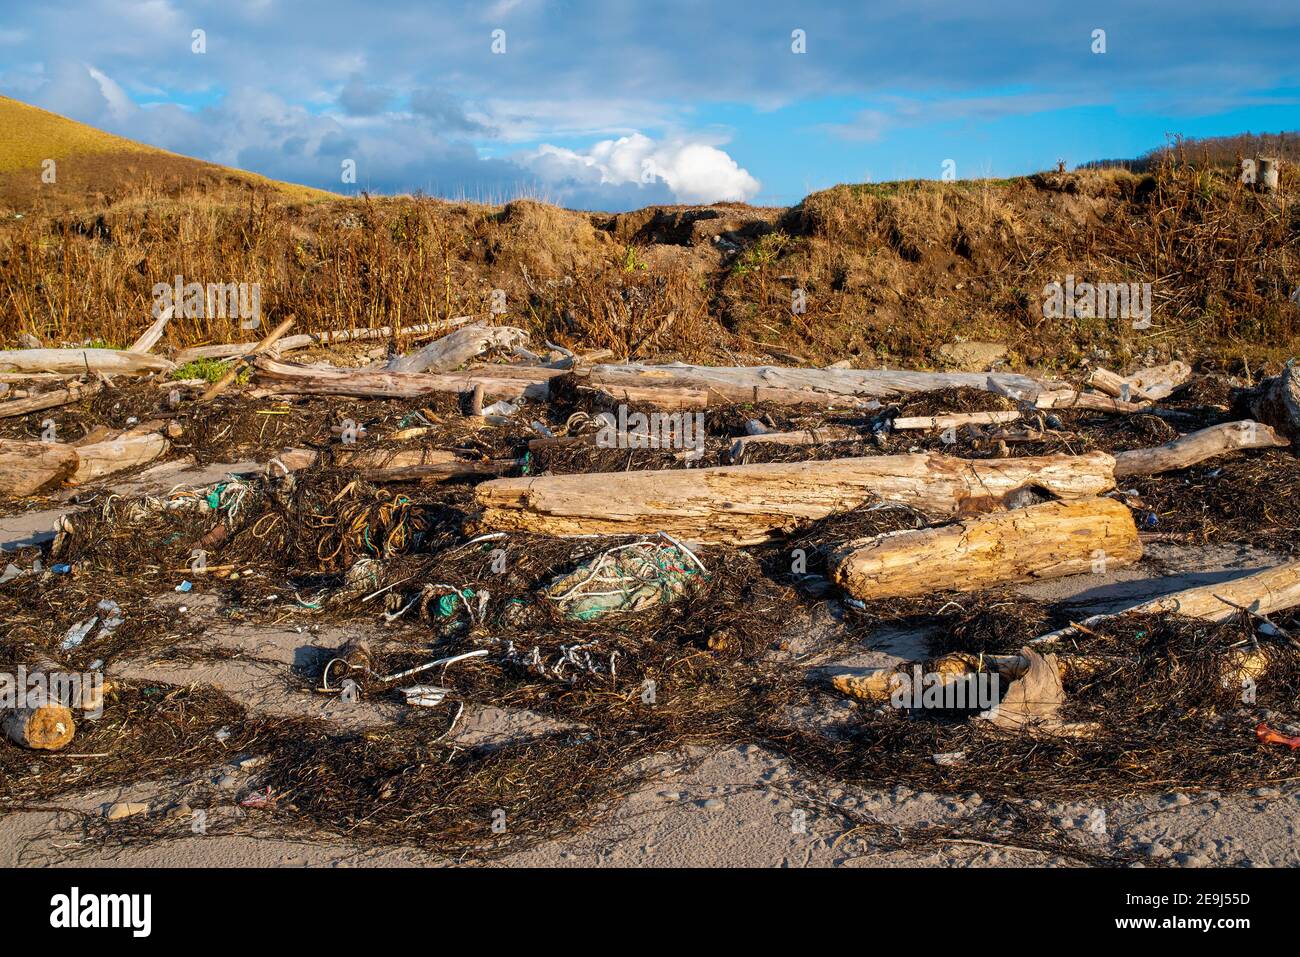 Plastic pollution. Plastic and wastes trash pollute the beach. Old trees and garbage washed ashore after the storm. Stock Photo